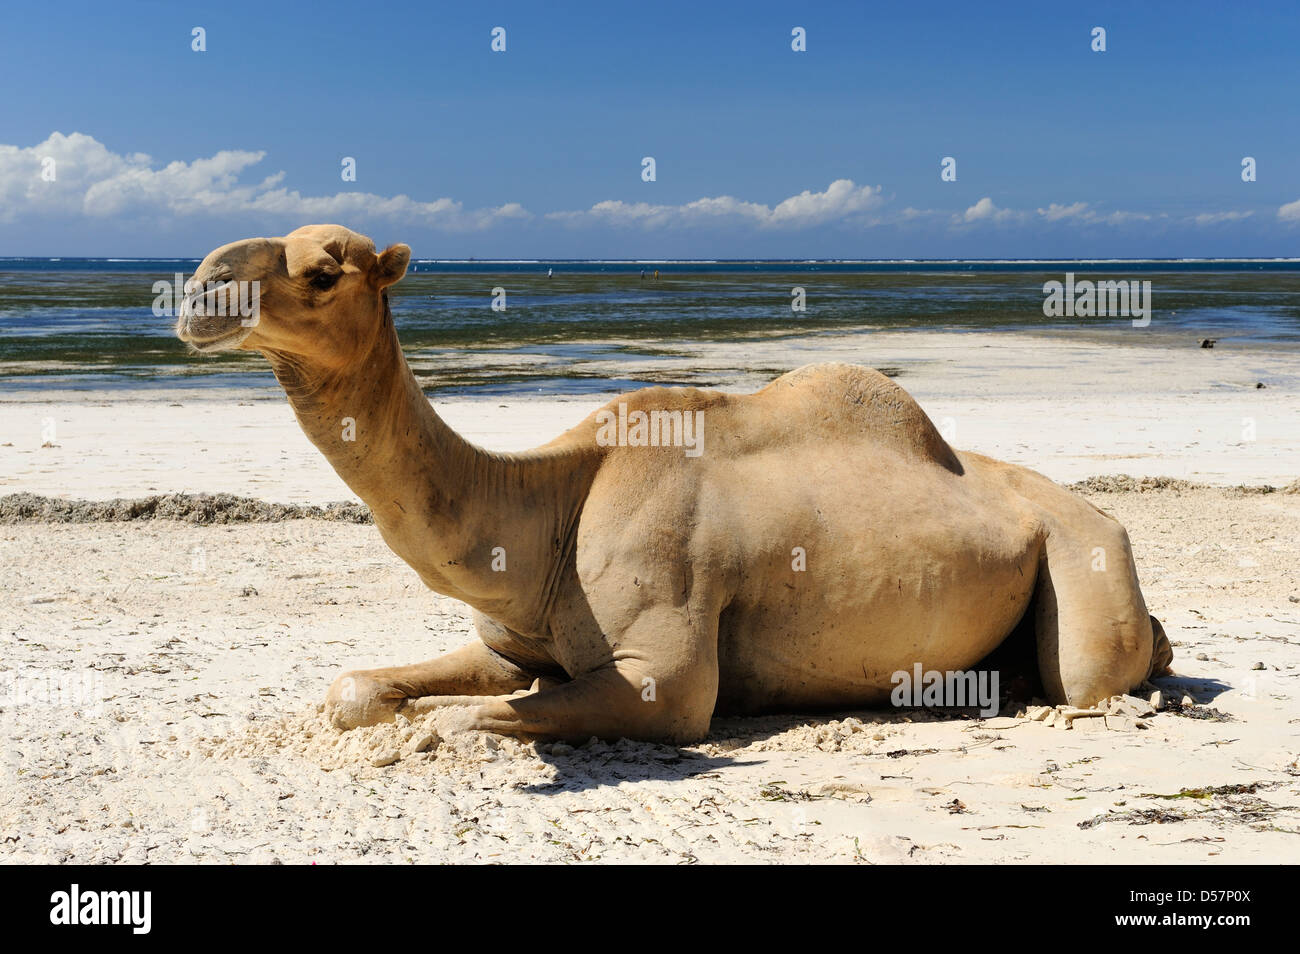 Camel rides on the beach at Mombasa, Kenya, East Africa Stock Photo